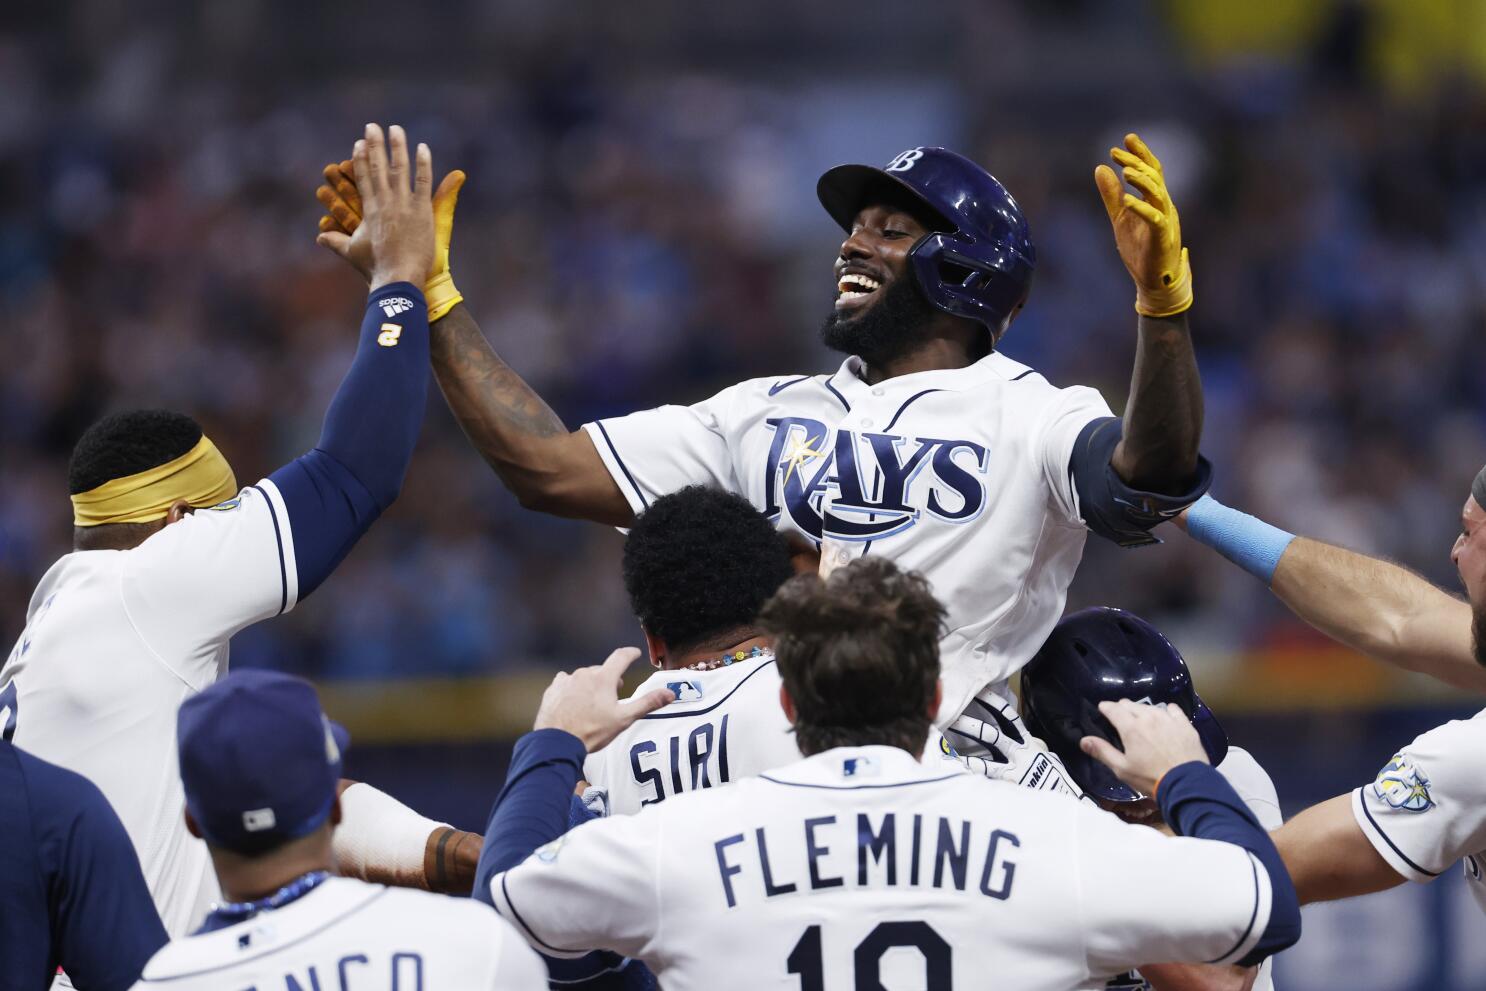 Guardians Beat Rays in 15 Innings and Advance to Division Series